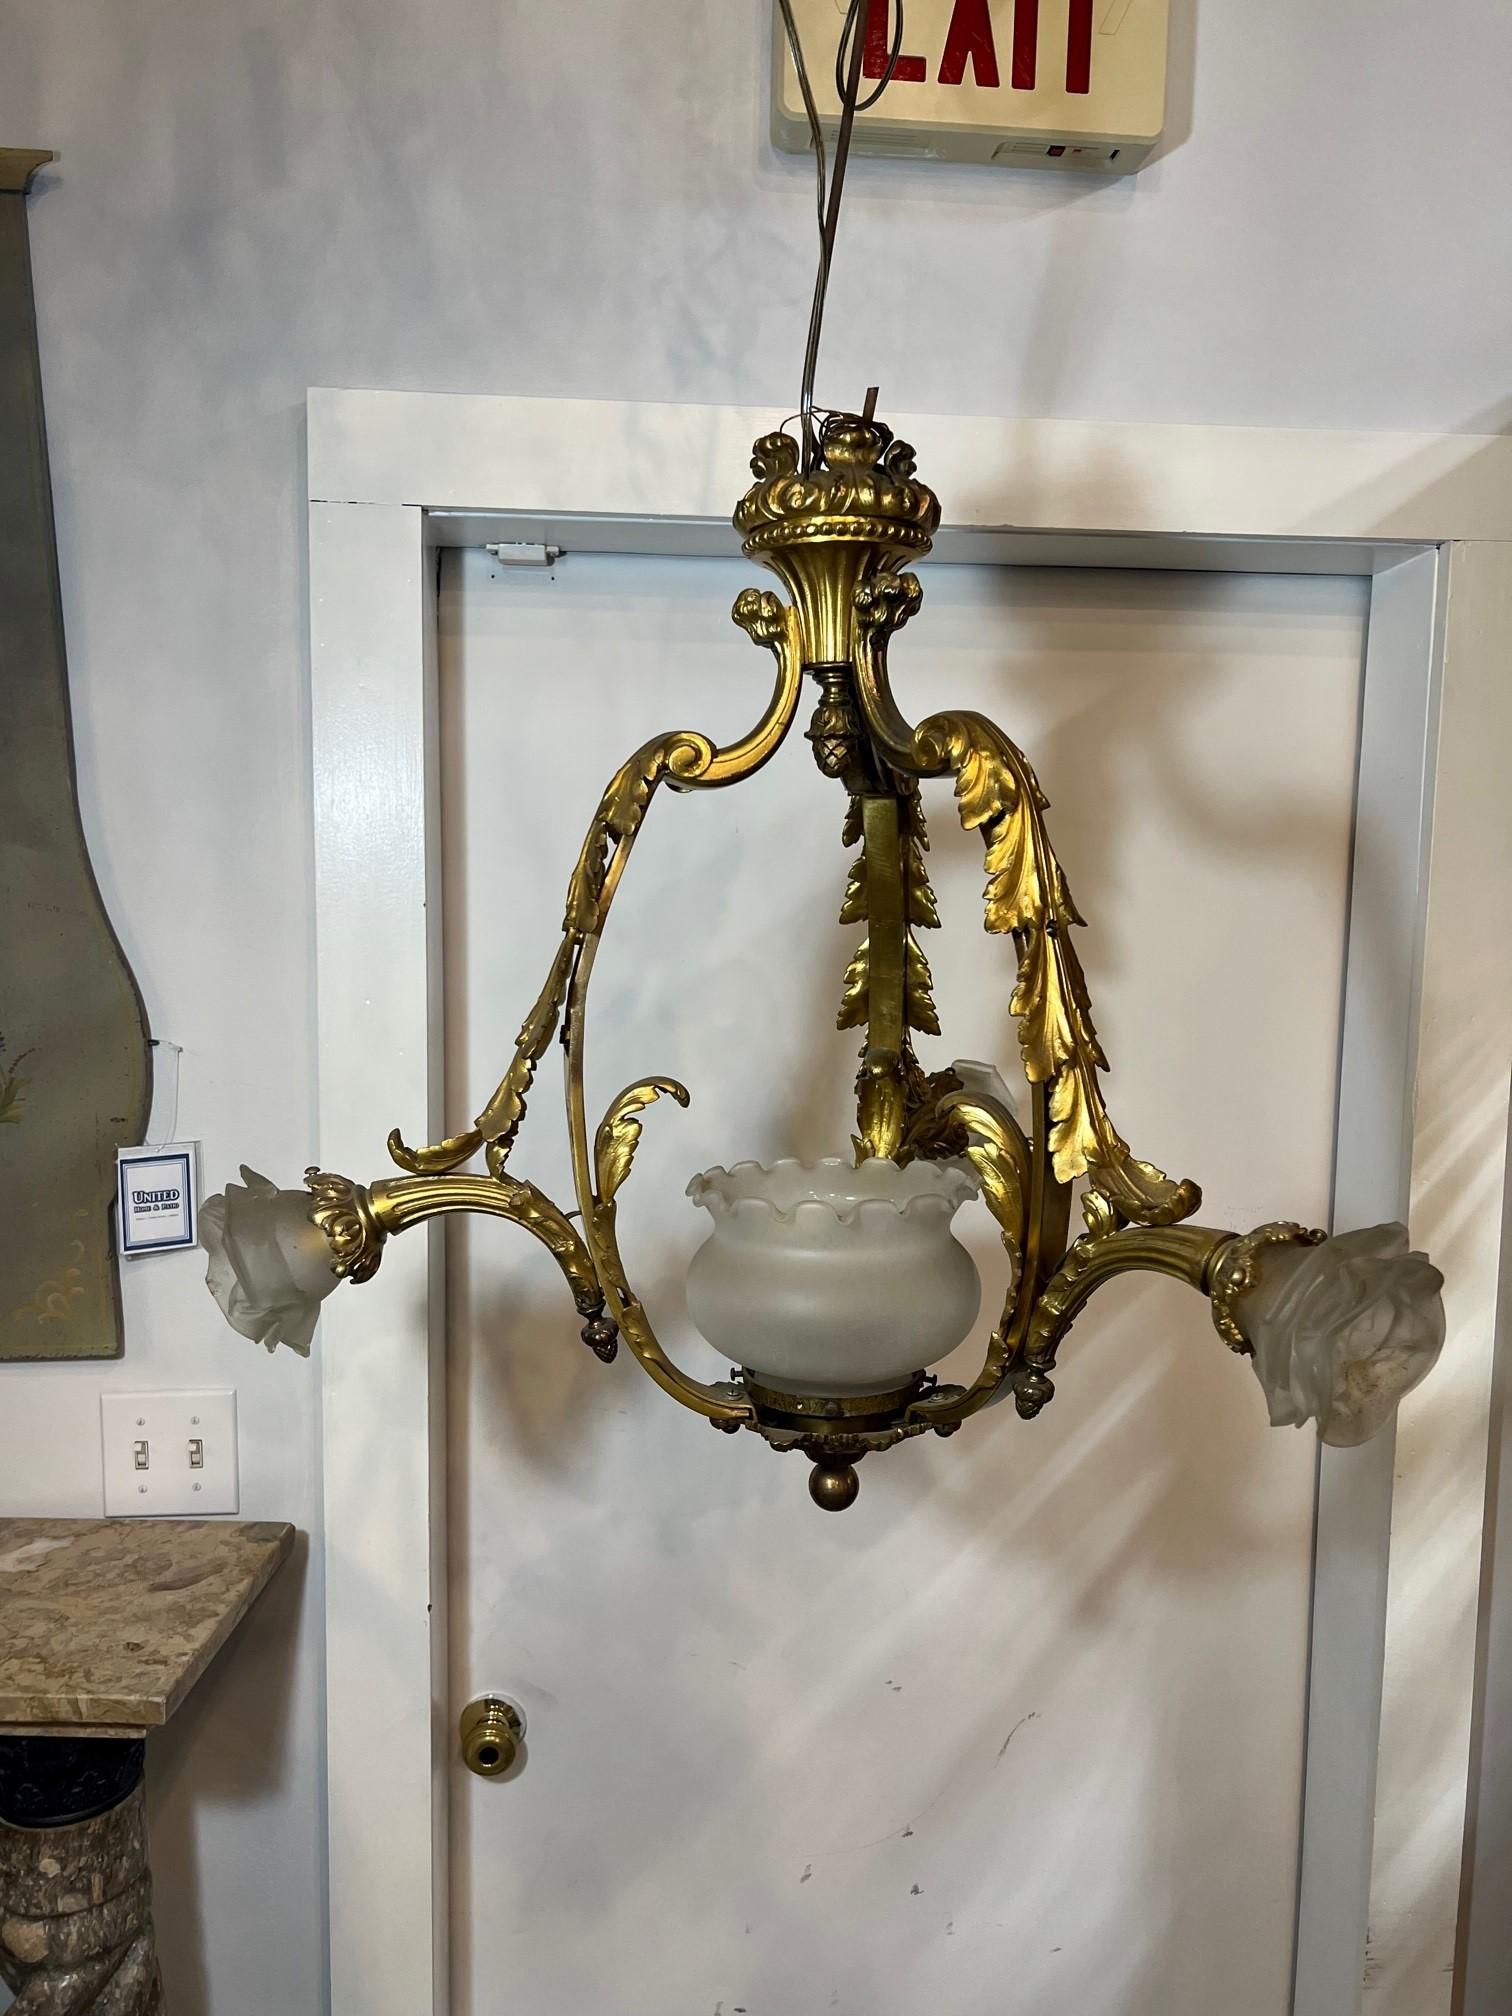 Early 20th century ( maybe earlier ) bronze three arm chandelier from Paris France. The bronze filigree and acanthus on the arms look amazing as shown in the photos. The chandelier has three glass shades and one glass globe in the center which have